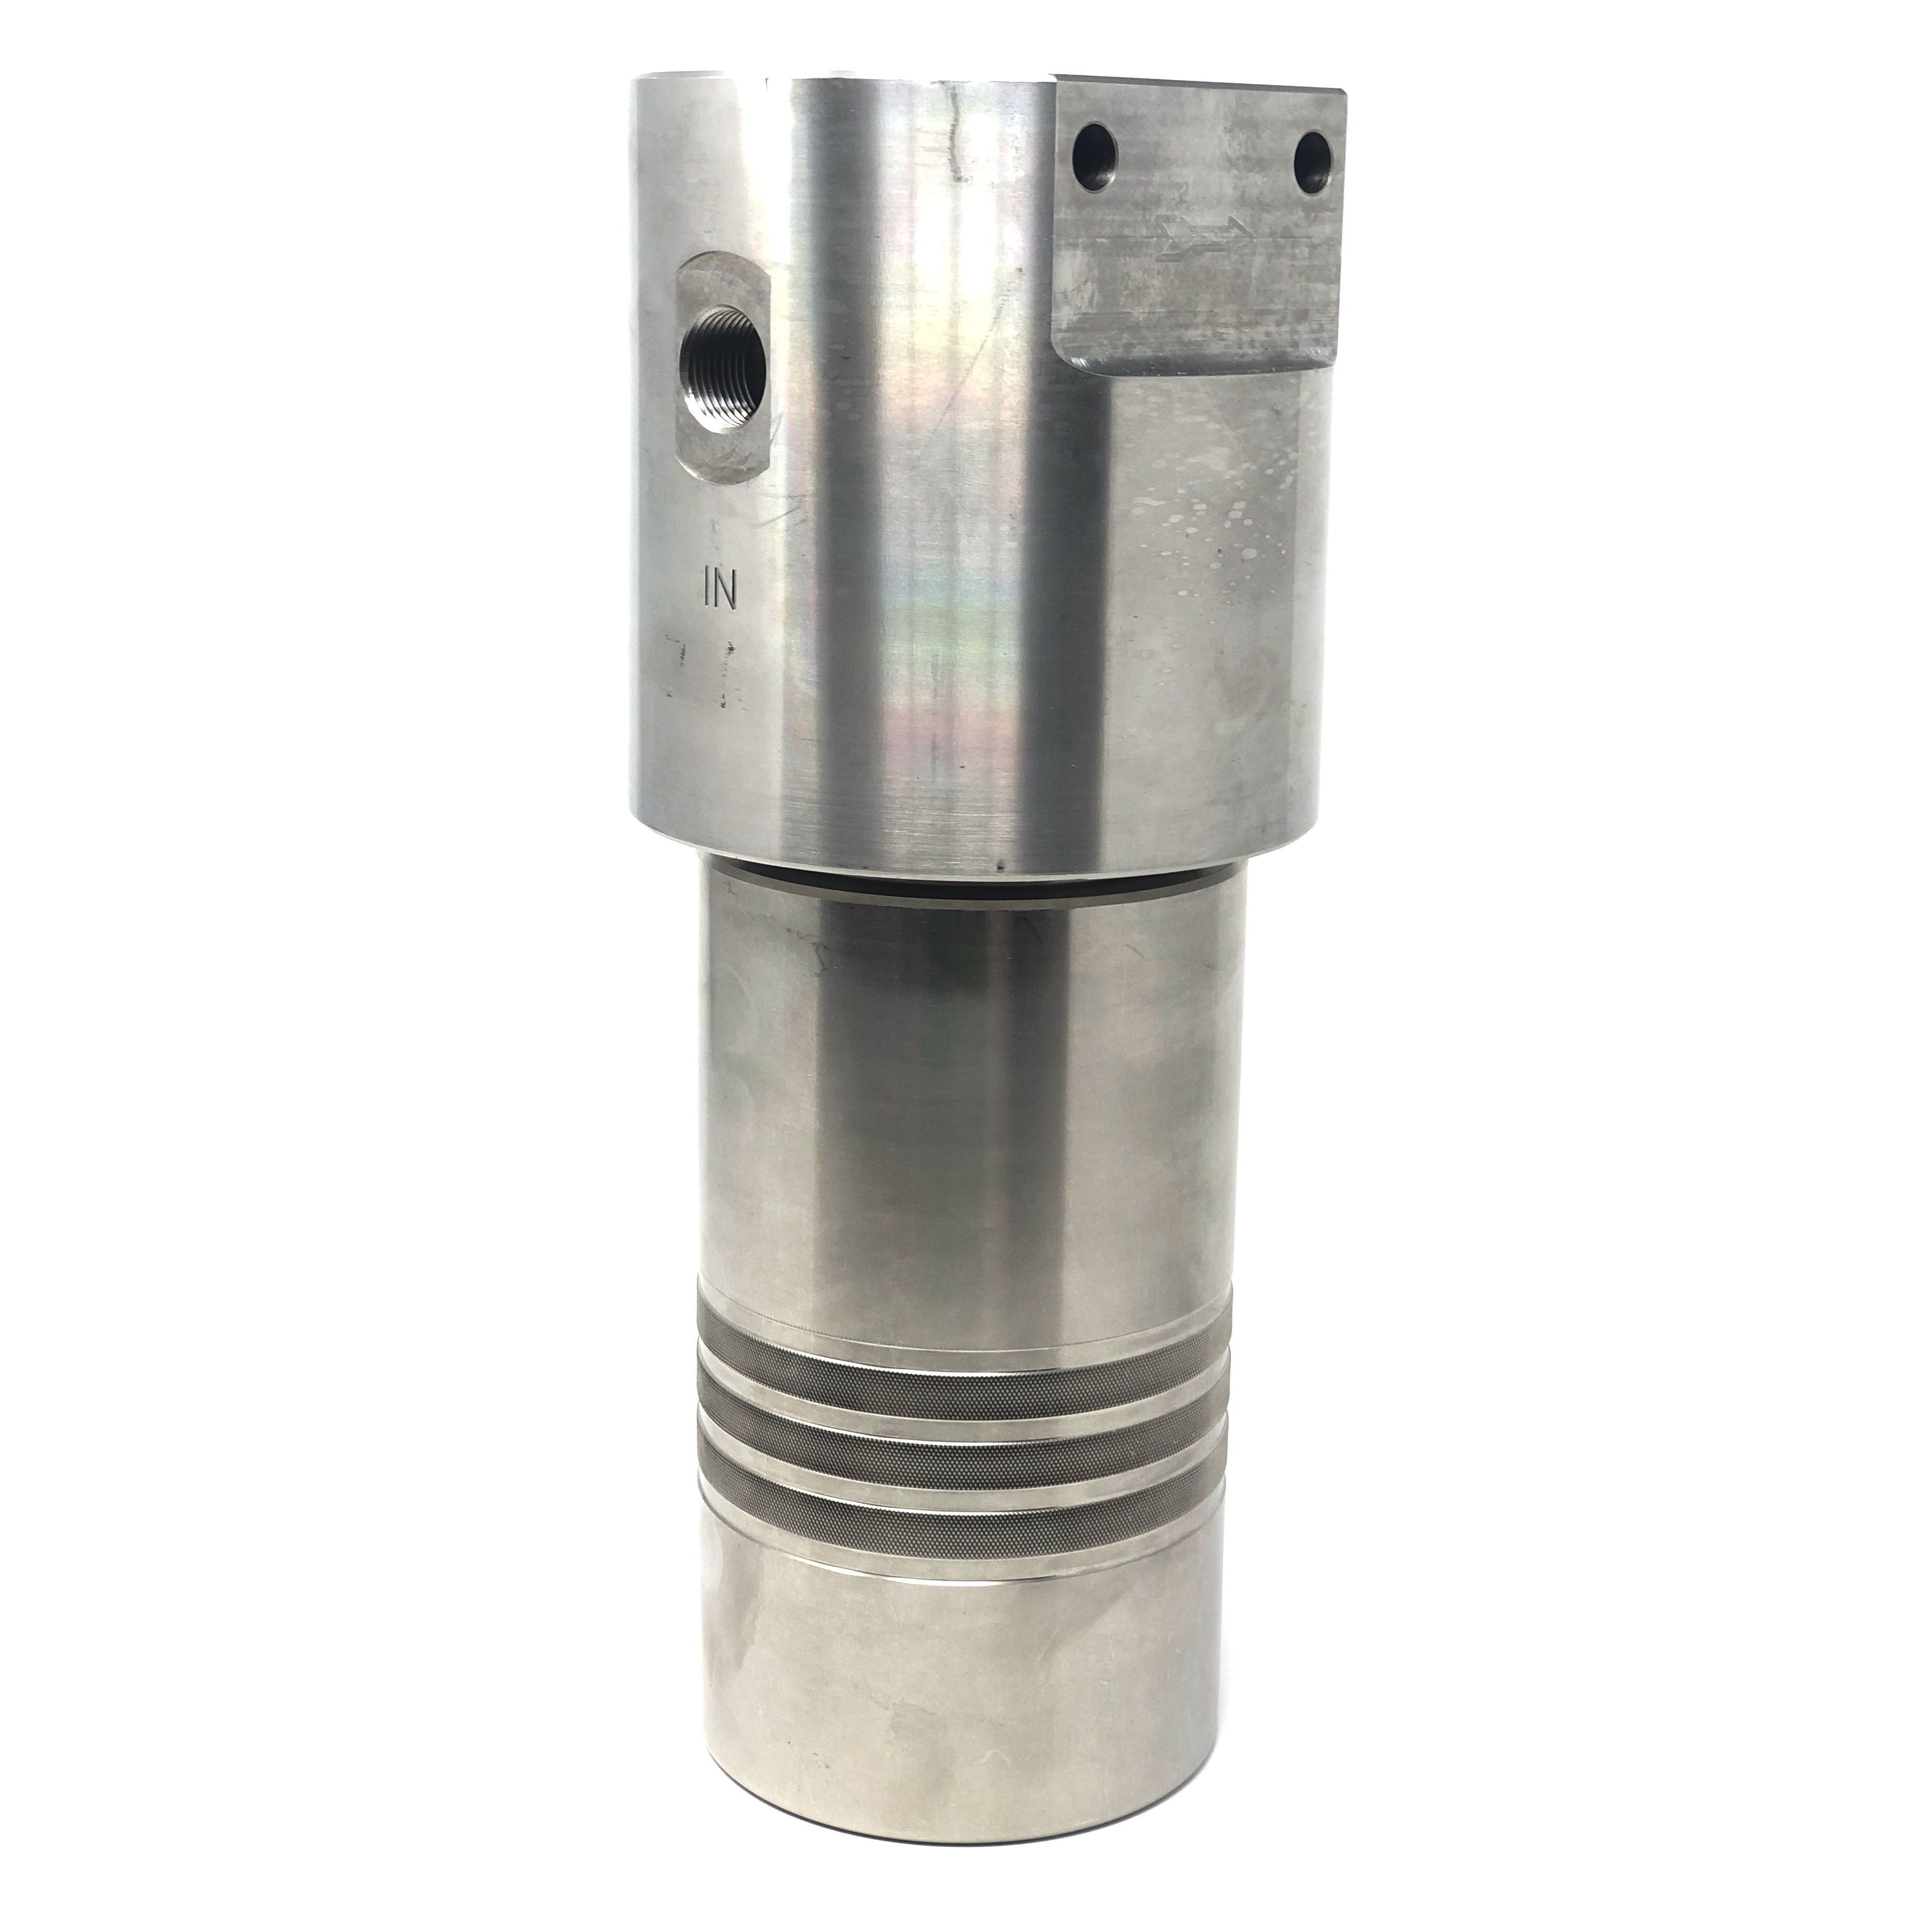 52S-244N-40SEN : Chase Ultra High Pressure Inline Filter, 10000psi, 1/4" NPT, 40 Micron, With Visual Indicator, No Bypass